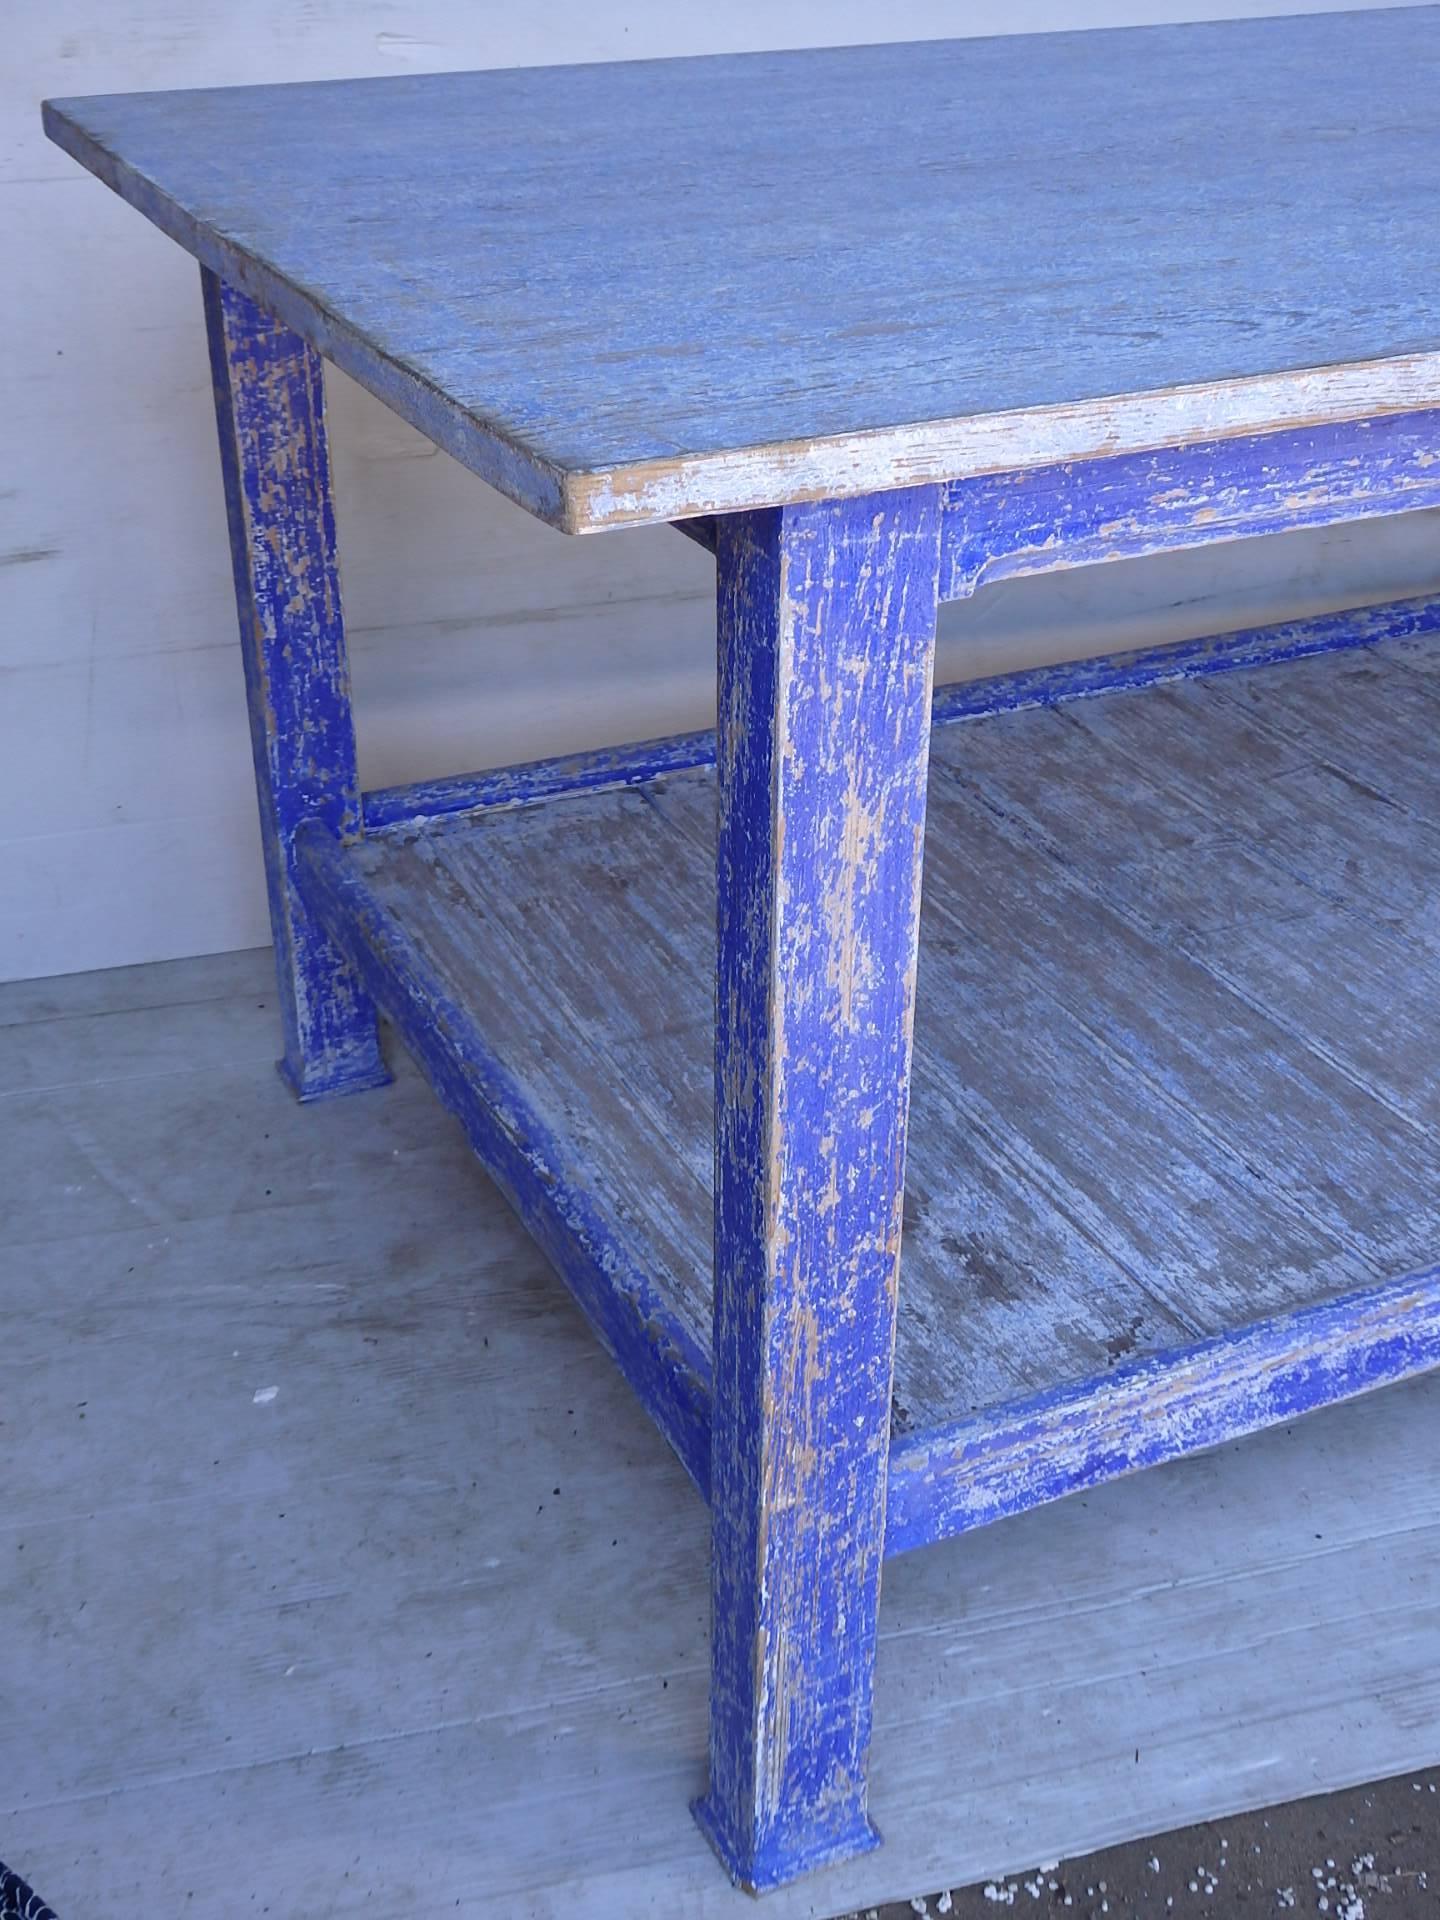 A large painted work table with old blue paint, great work table or centre island,
circa 1920.